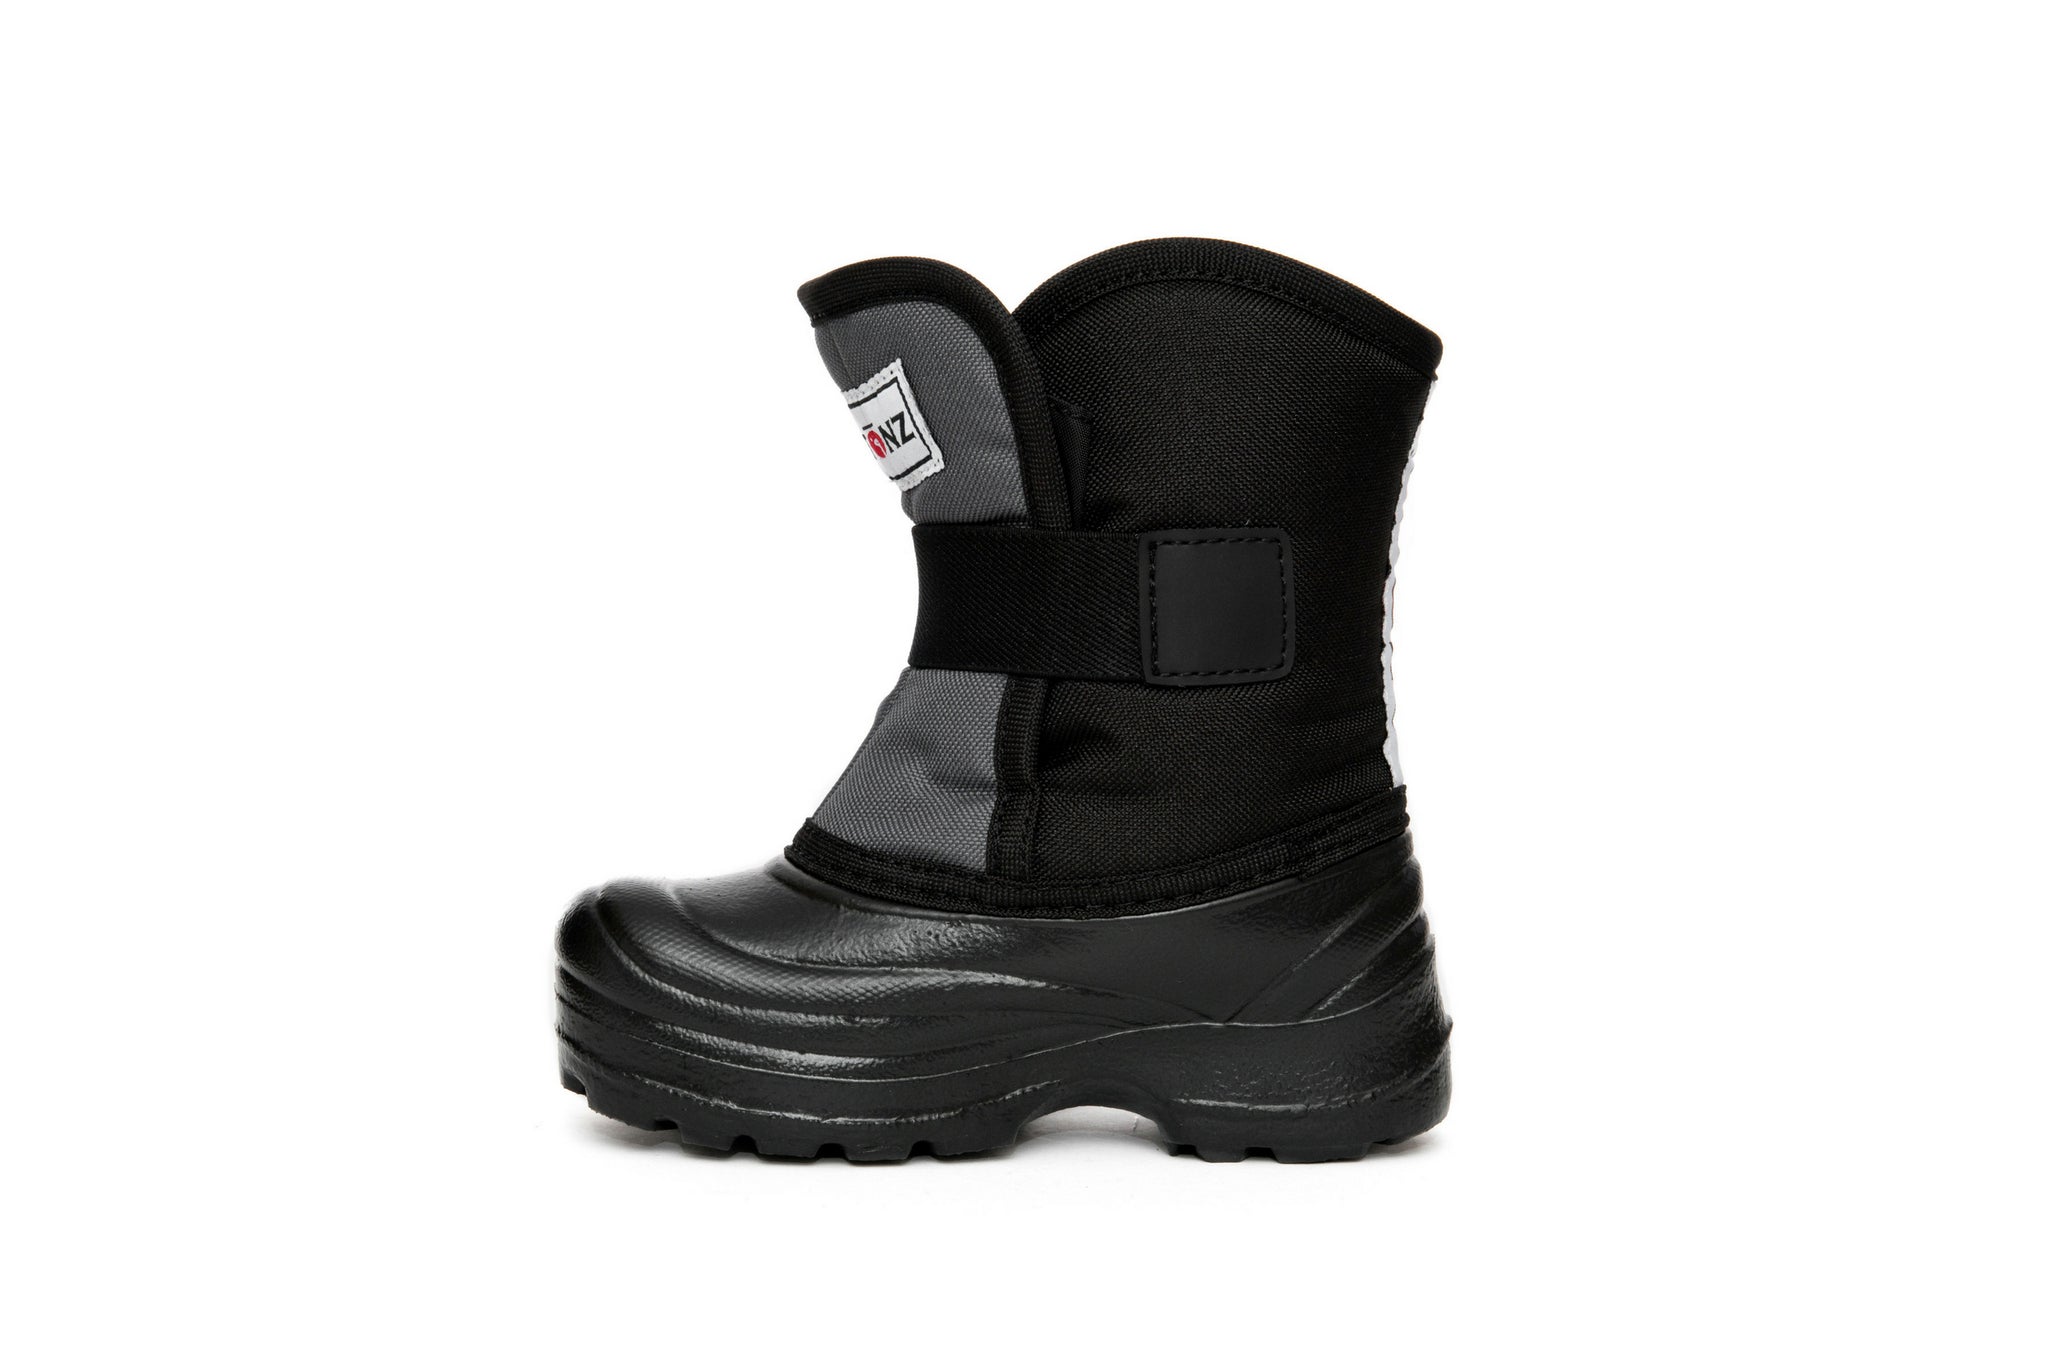 Scout Winter Boots - Reflective for | Shoes Grey/Black - Stonz | Toddlers Weather-resistant